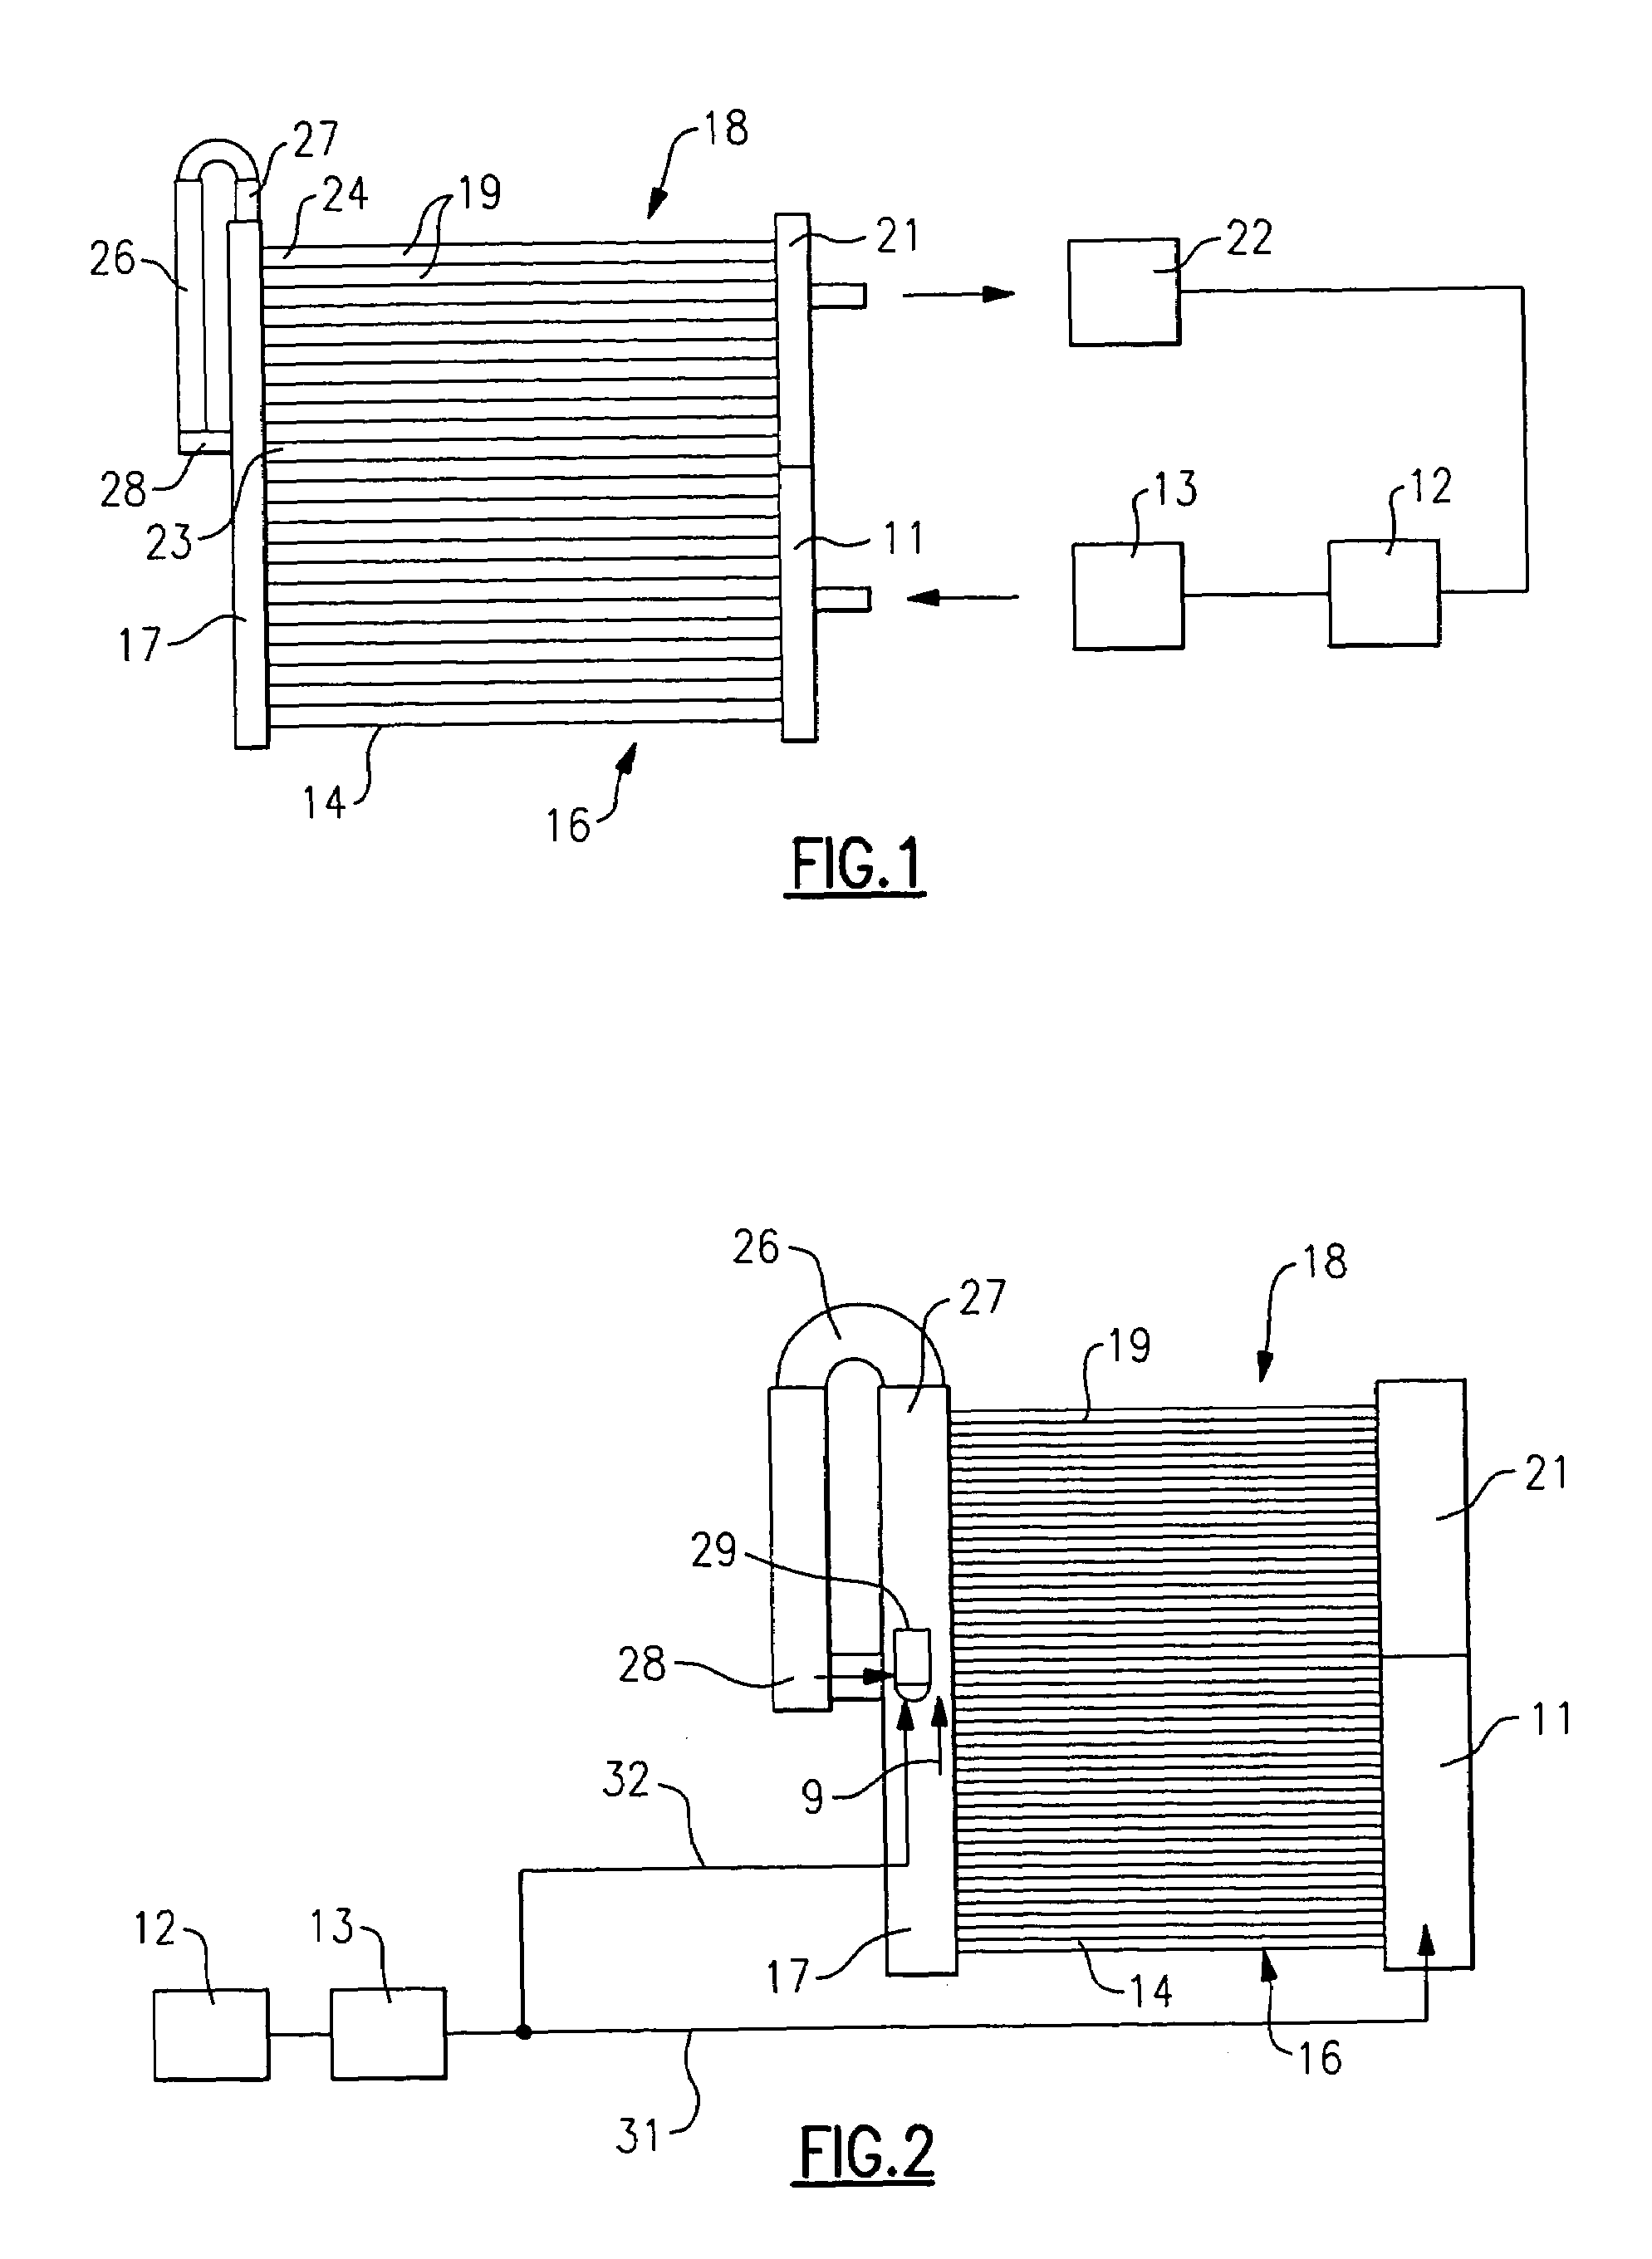 Two-phase refrigerant distribution system for multiple pass evaporator coils